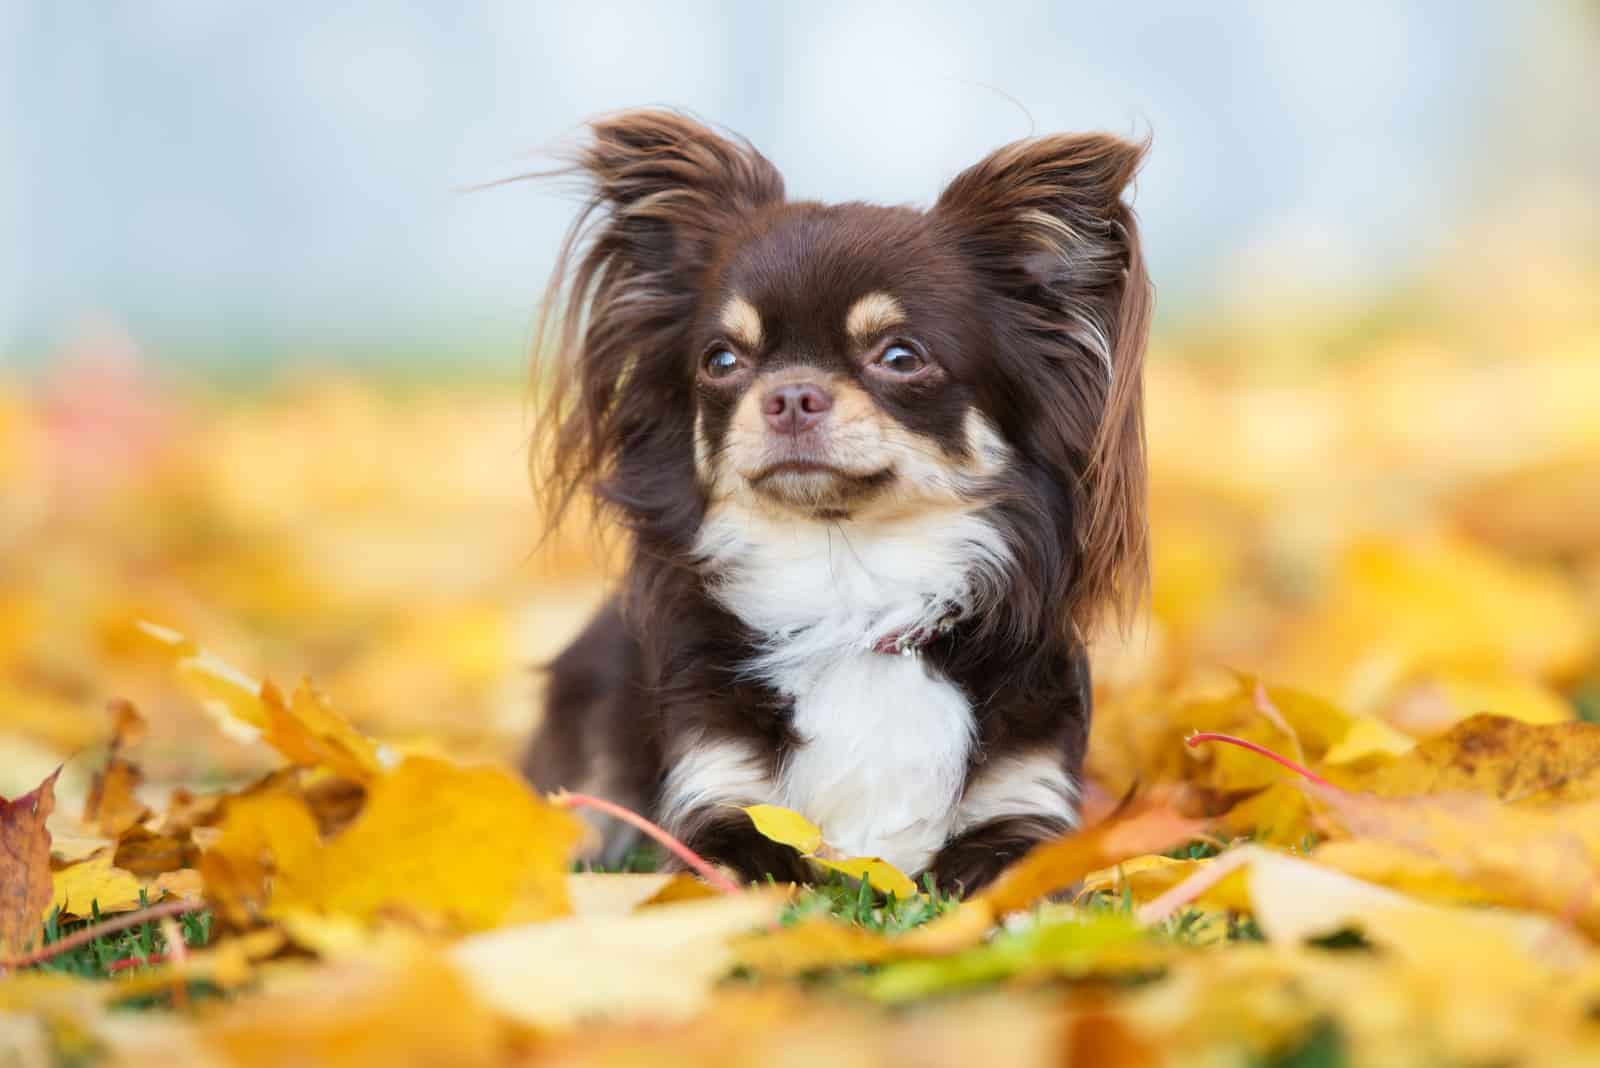 chihuahua sitting in leaves